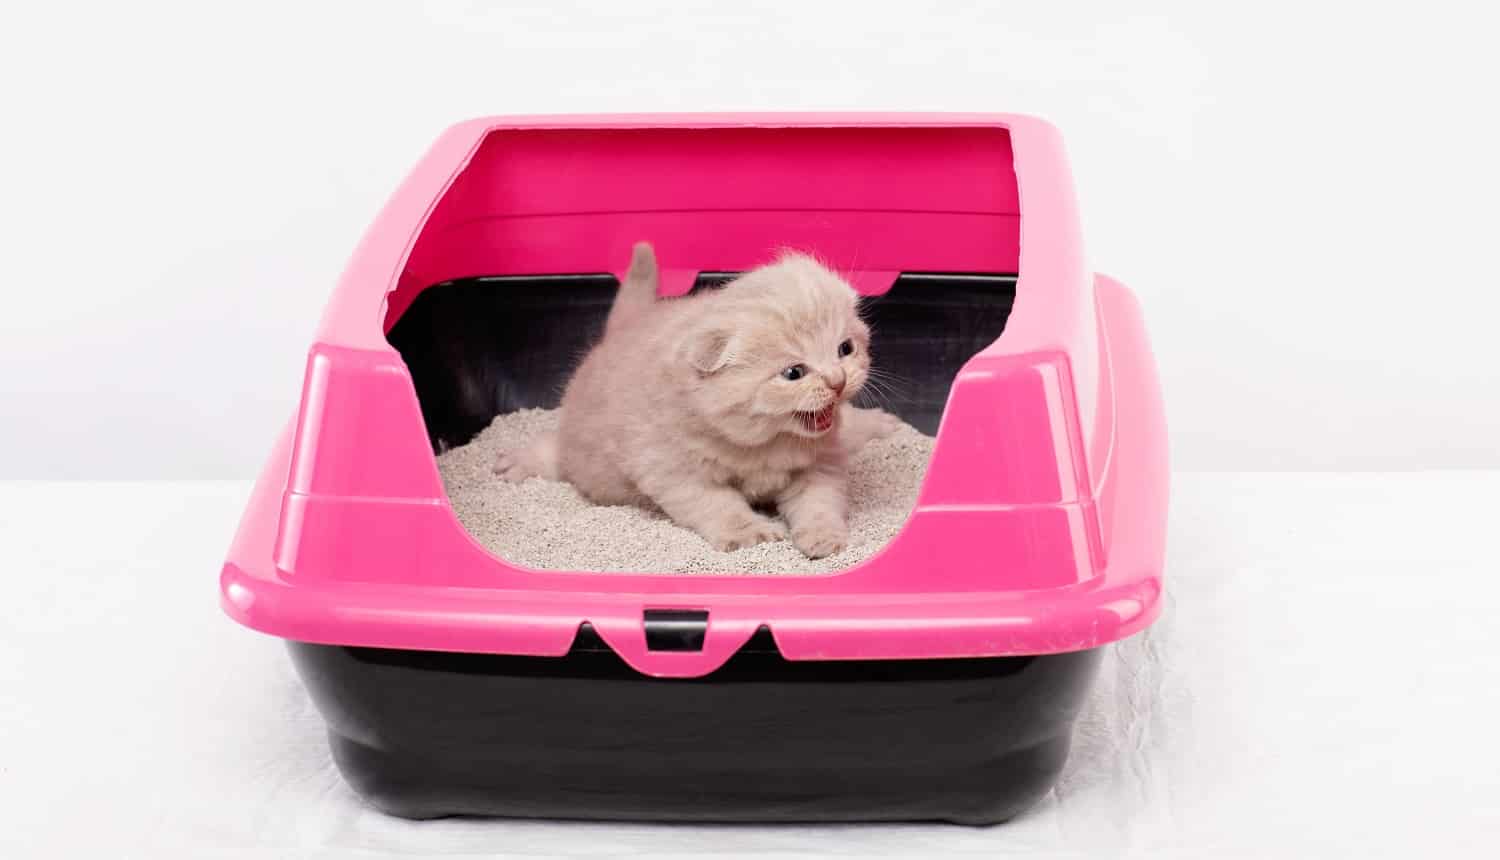 British kitten learns to walk in a pink tray, white background